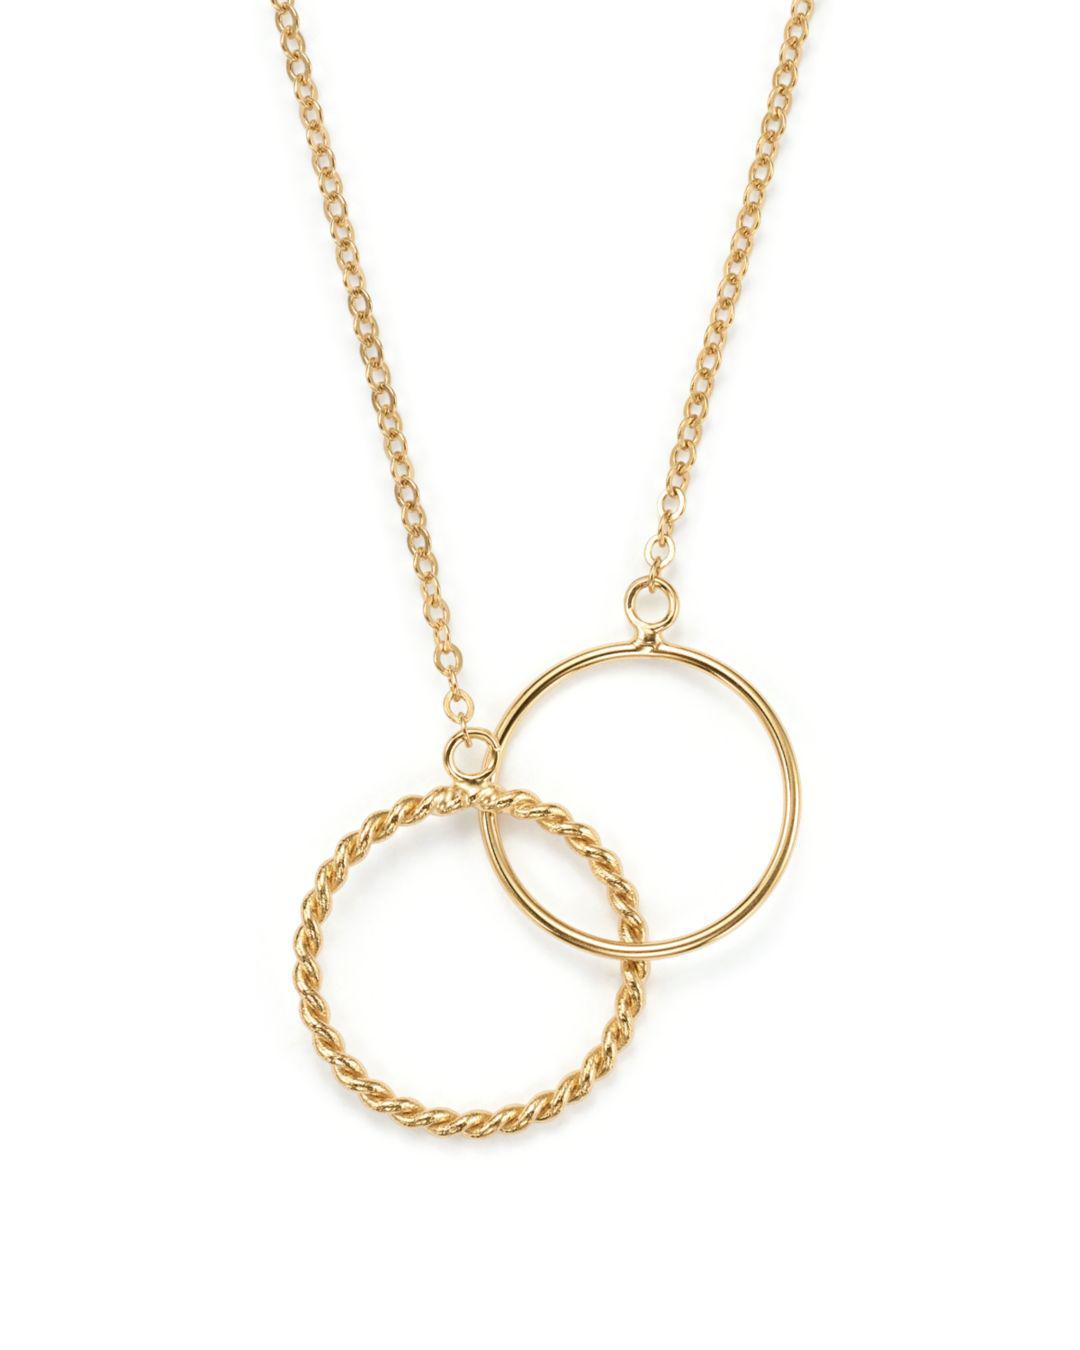 Bloomingdale's 14k Yellow Gold Interlocking Rings Necklace, 18" in